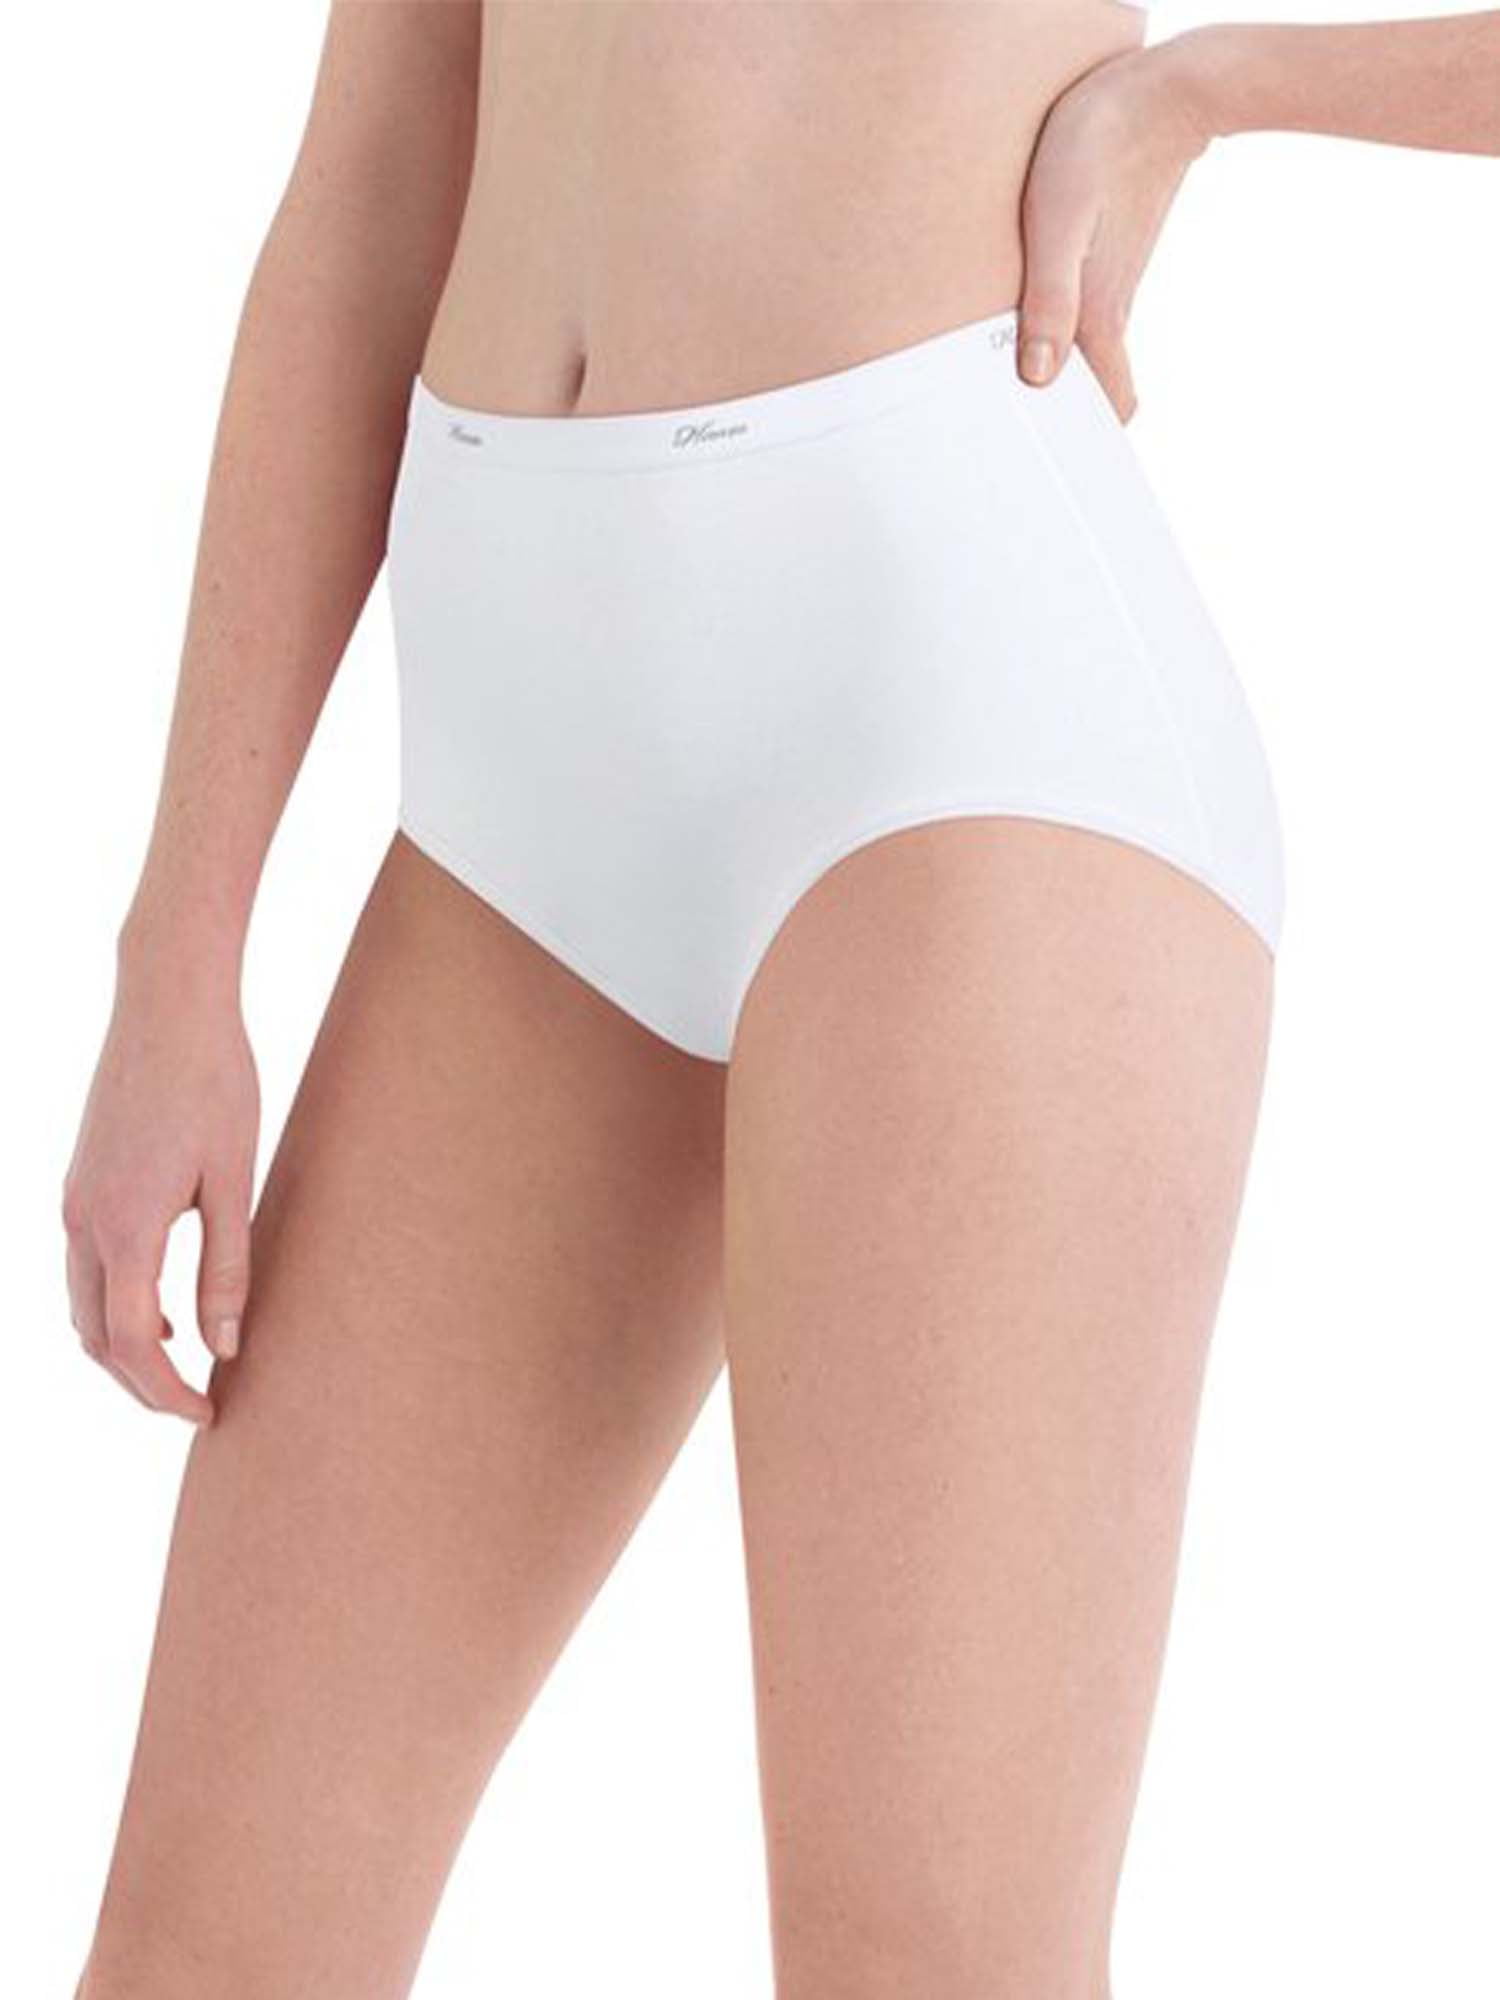 Hanes Womens Women's 10 Pack Cotton Brief Panty